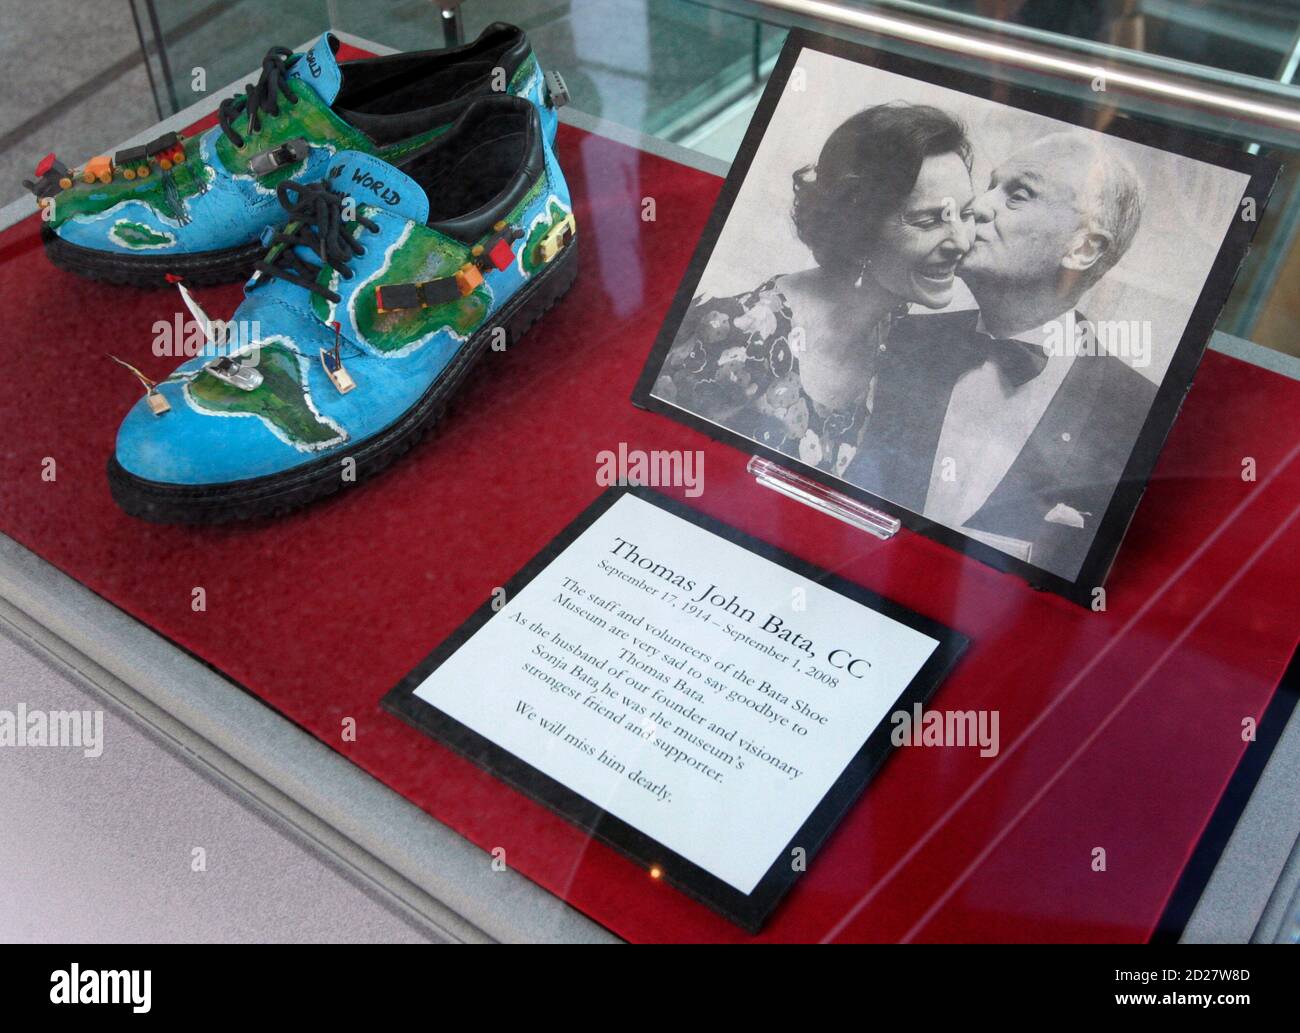 A memorial tribute to shoe mogul Thomas Bata is shown at the Bata Shoe  Museum in